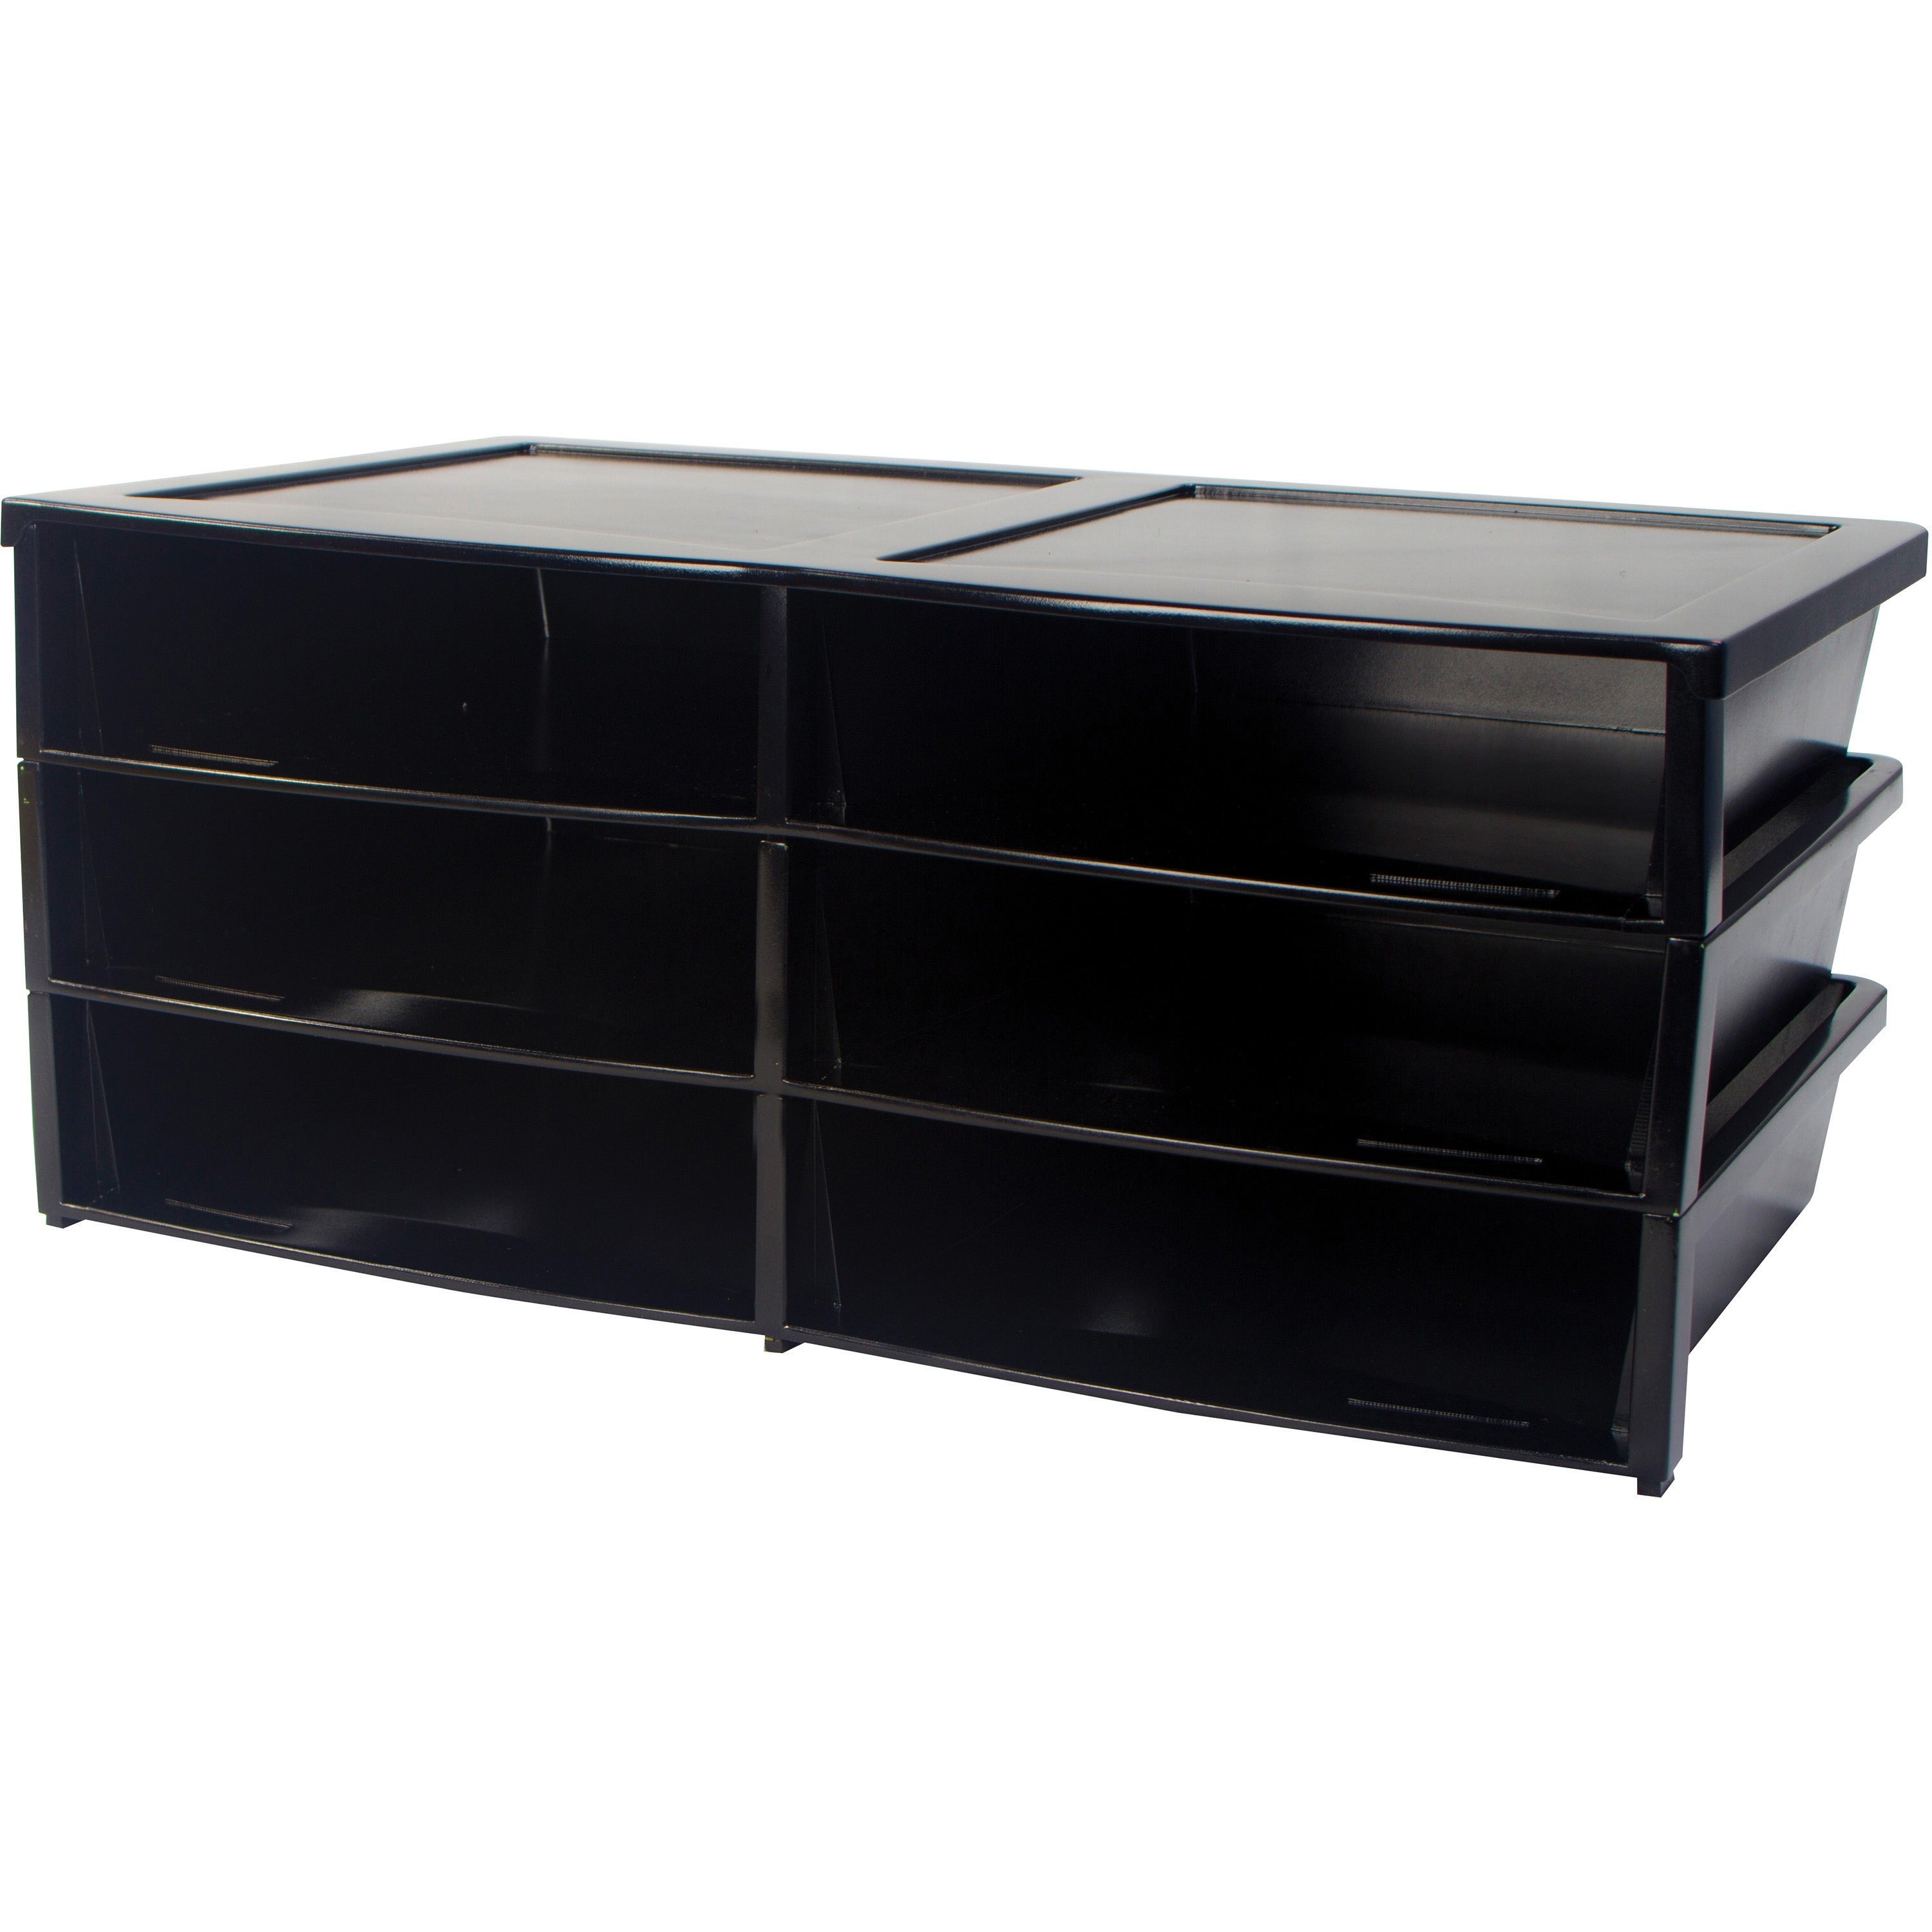 storex-quick-stack-6-sorter-organizer-500-x-sheet-6-compartments-compartment-size-875-x-1150-x-2-87-height-x-136-width205-length-black-plastic-1-each_stx61446e01c - 3